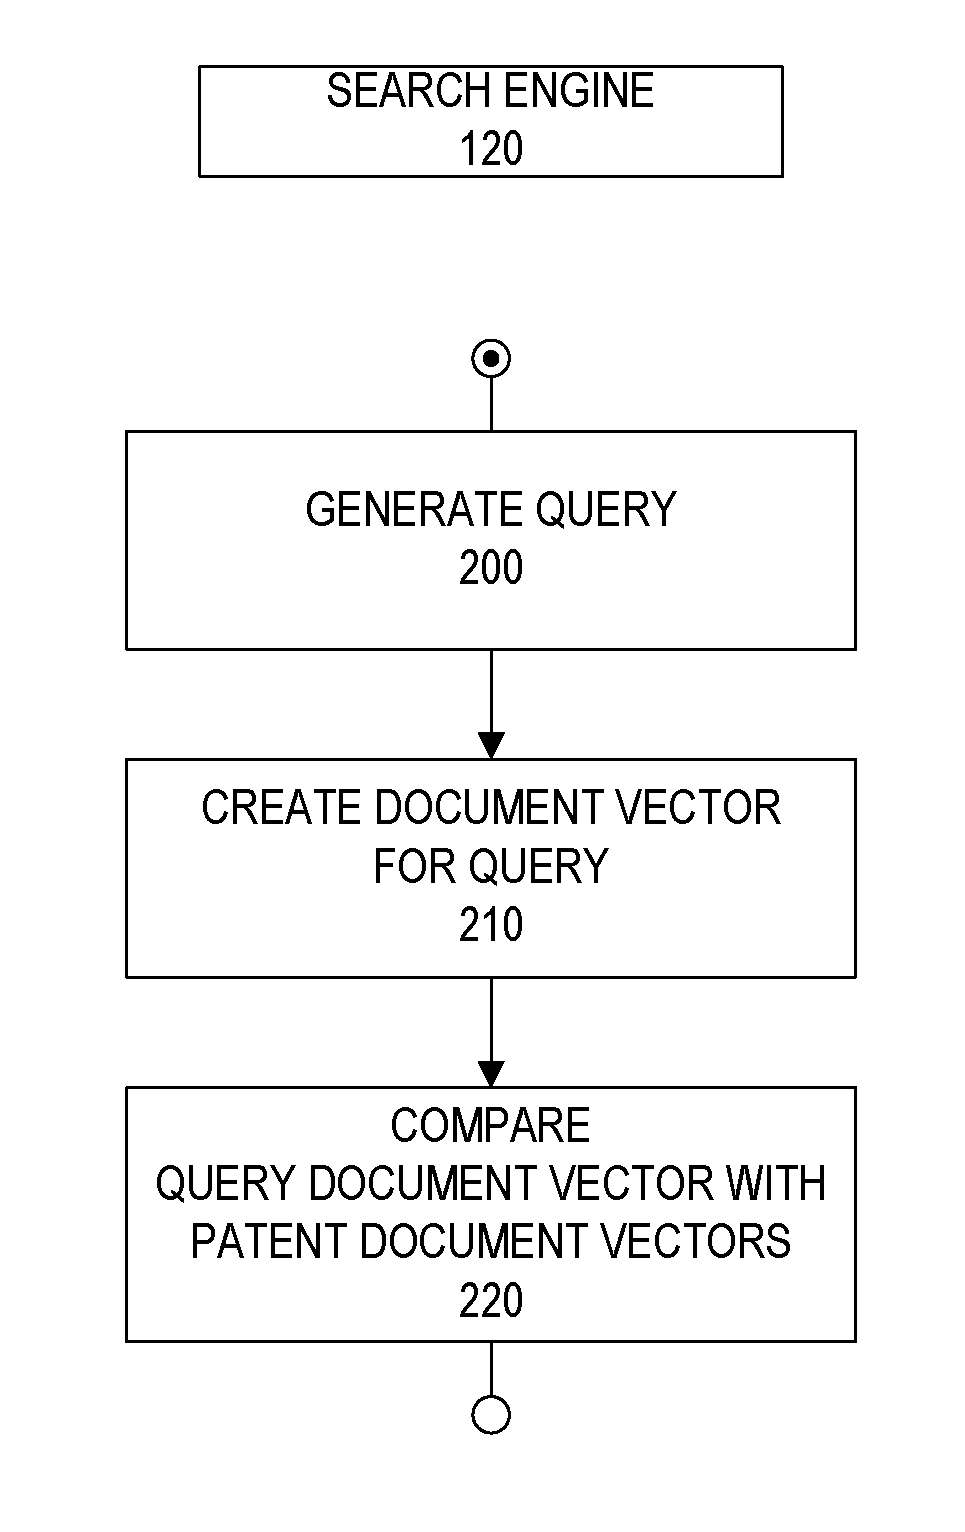 Generating intellectual property intelligence using a patent search engine